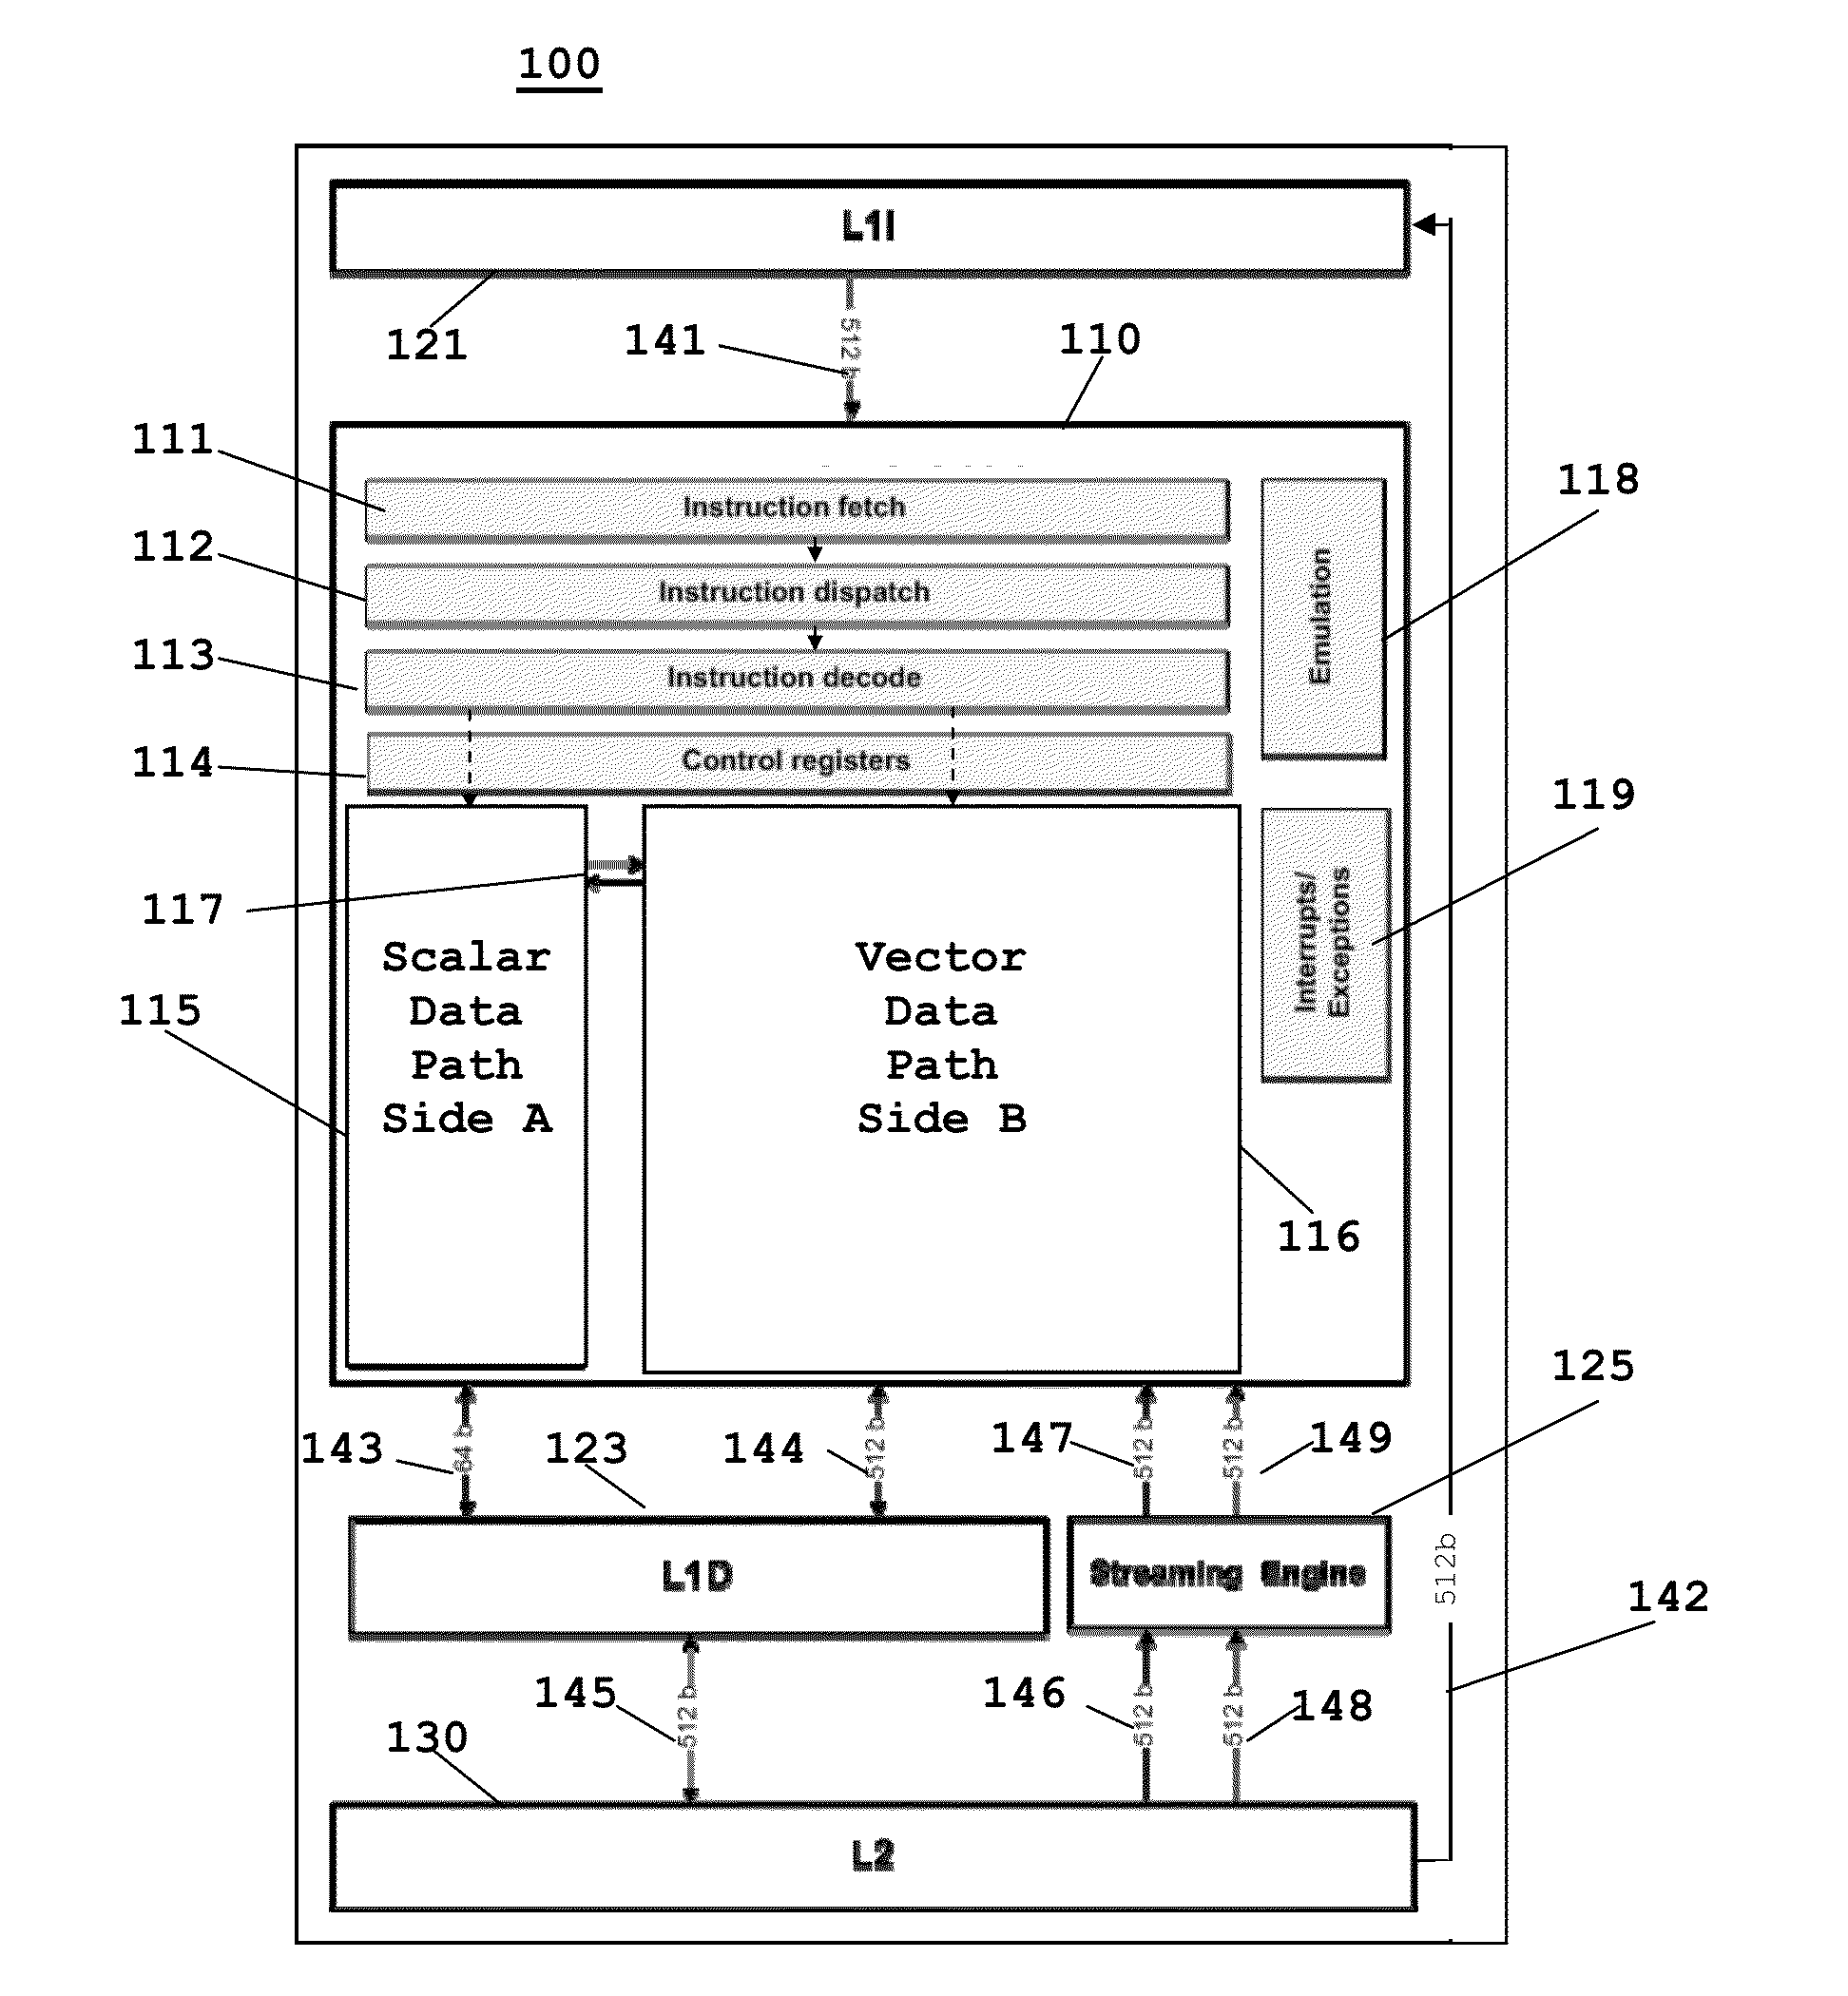 Method for performing random read access to a block of data using parallel lut read instruction in vector processors